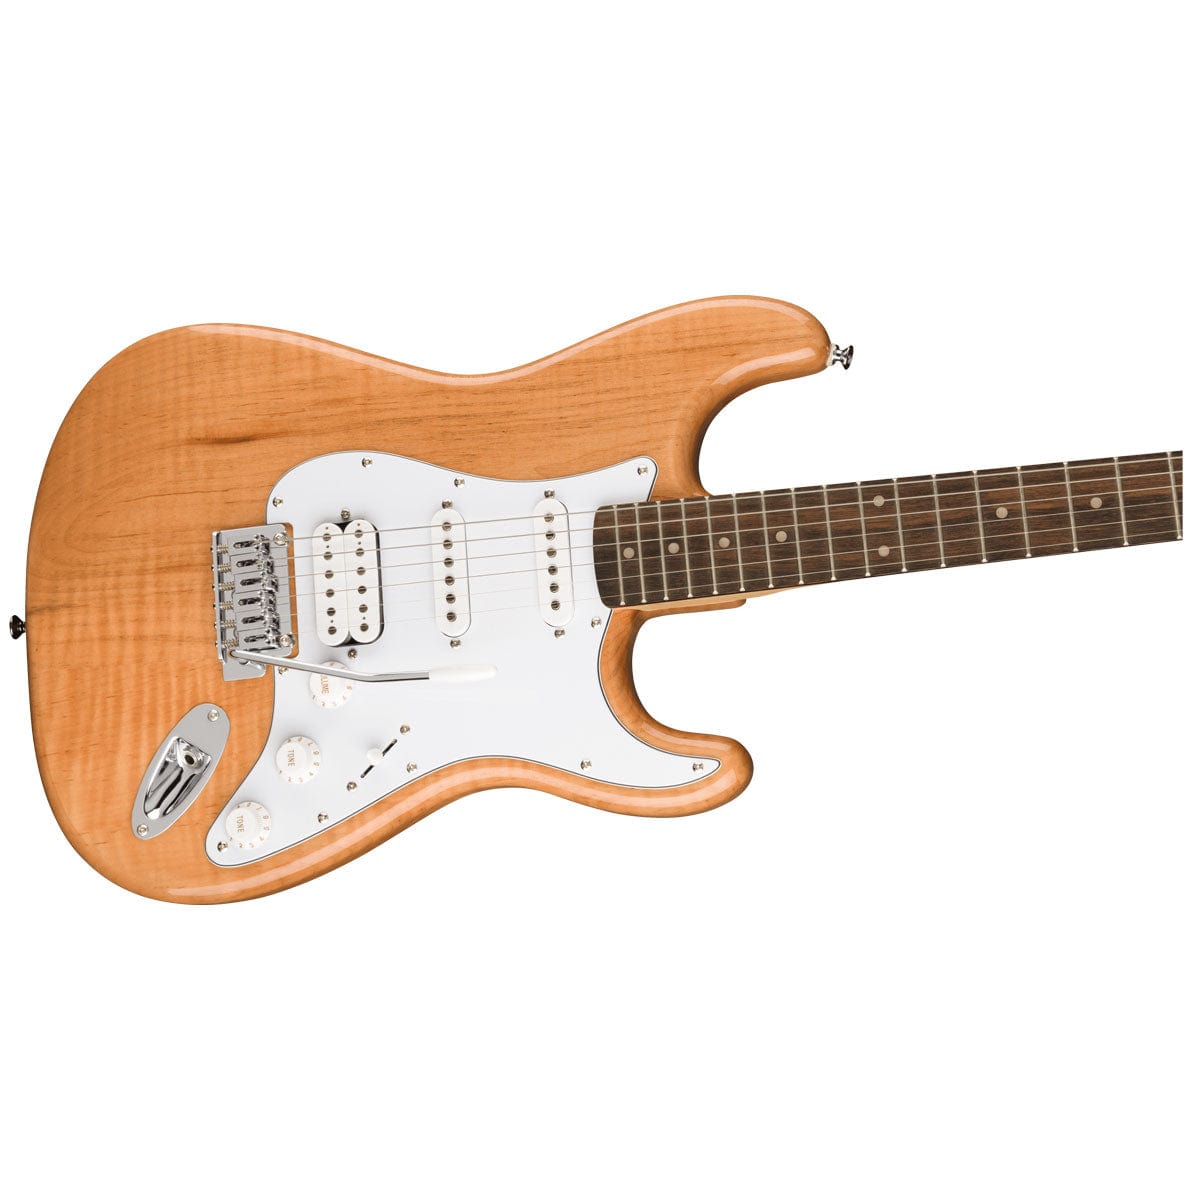 Squier Guitar Fender Squier Affinity Series Stratocaster HSS Natural - Byron Music